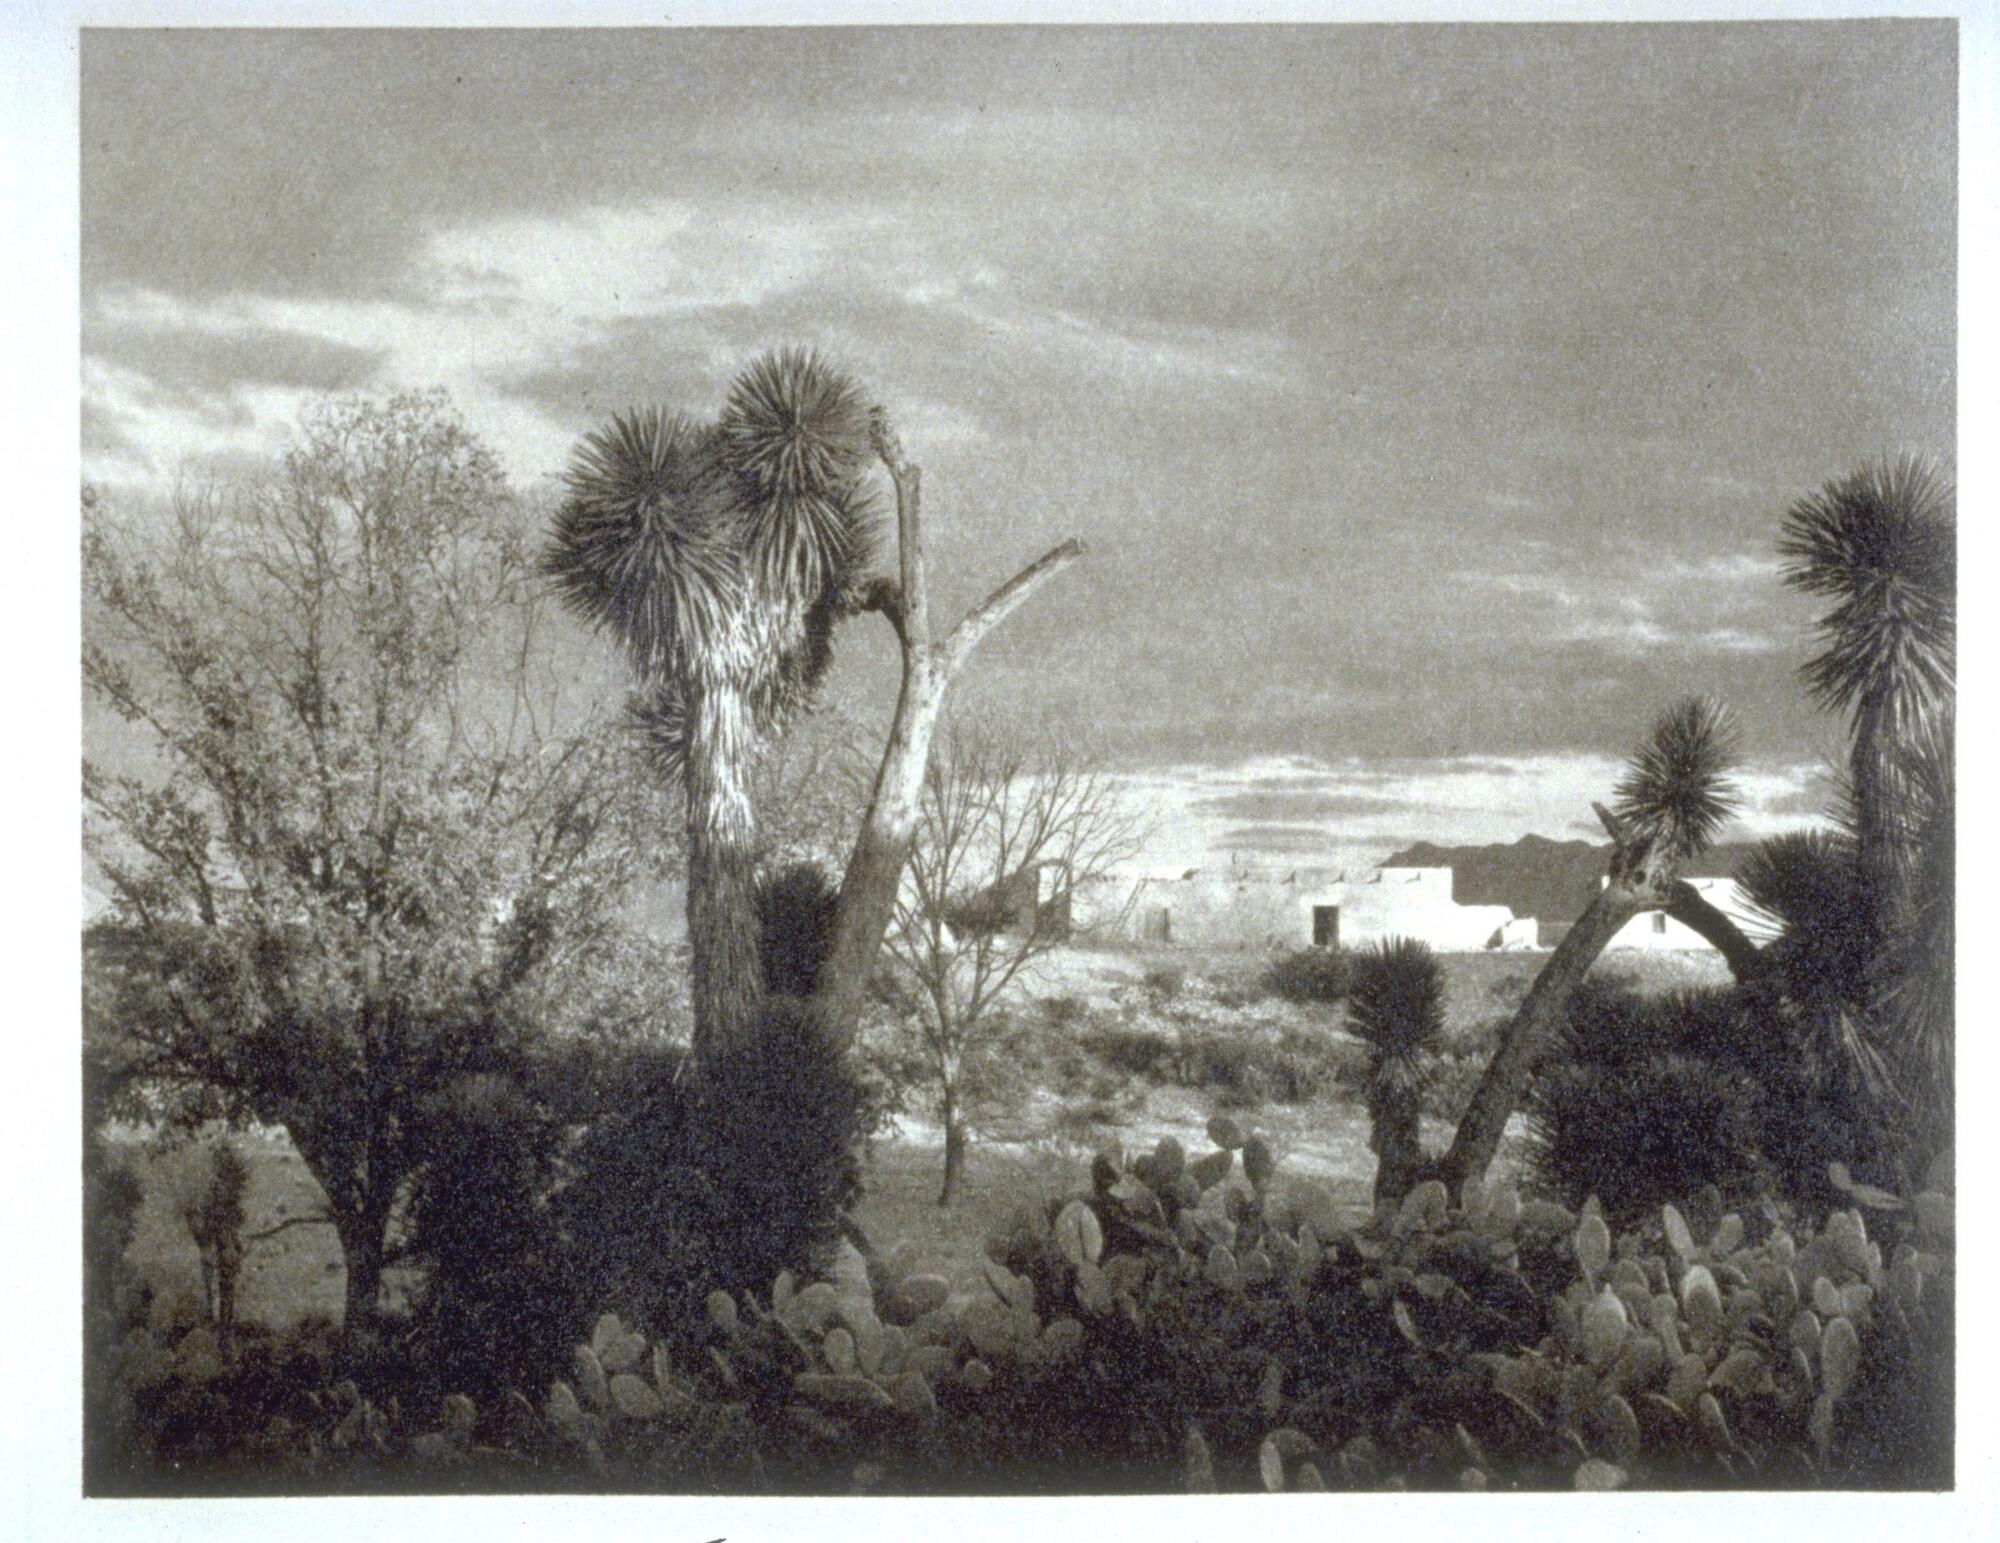 This photograph of a landscape represents cacti, trees, and an arid environment. In the background, white buildings sit on the horizon with a cloudy sky above.